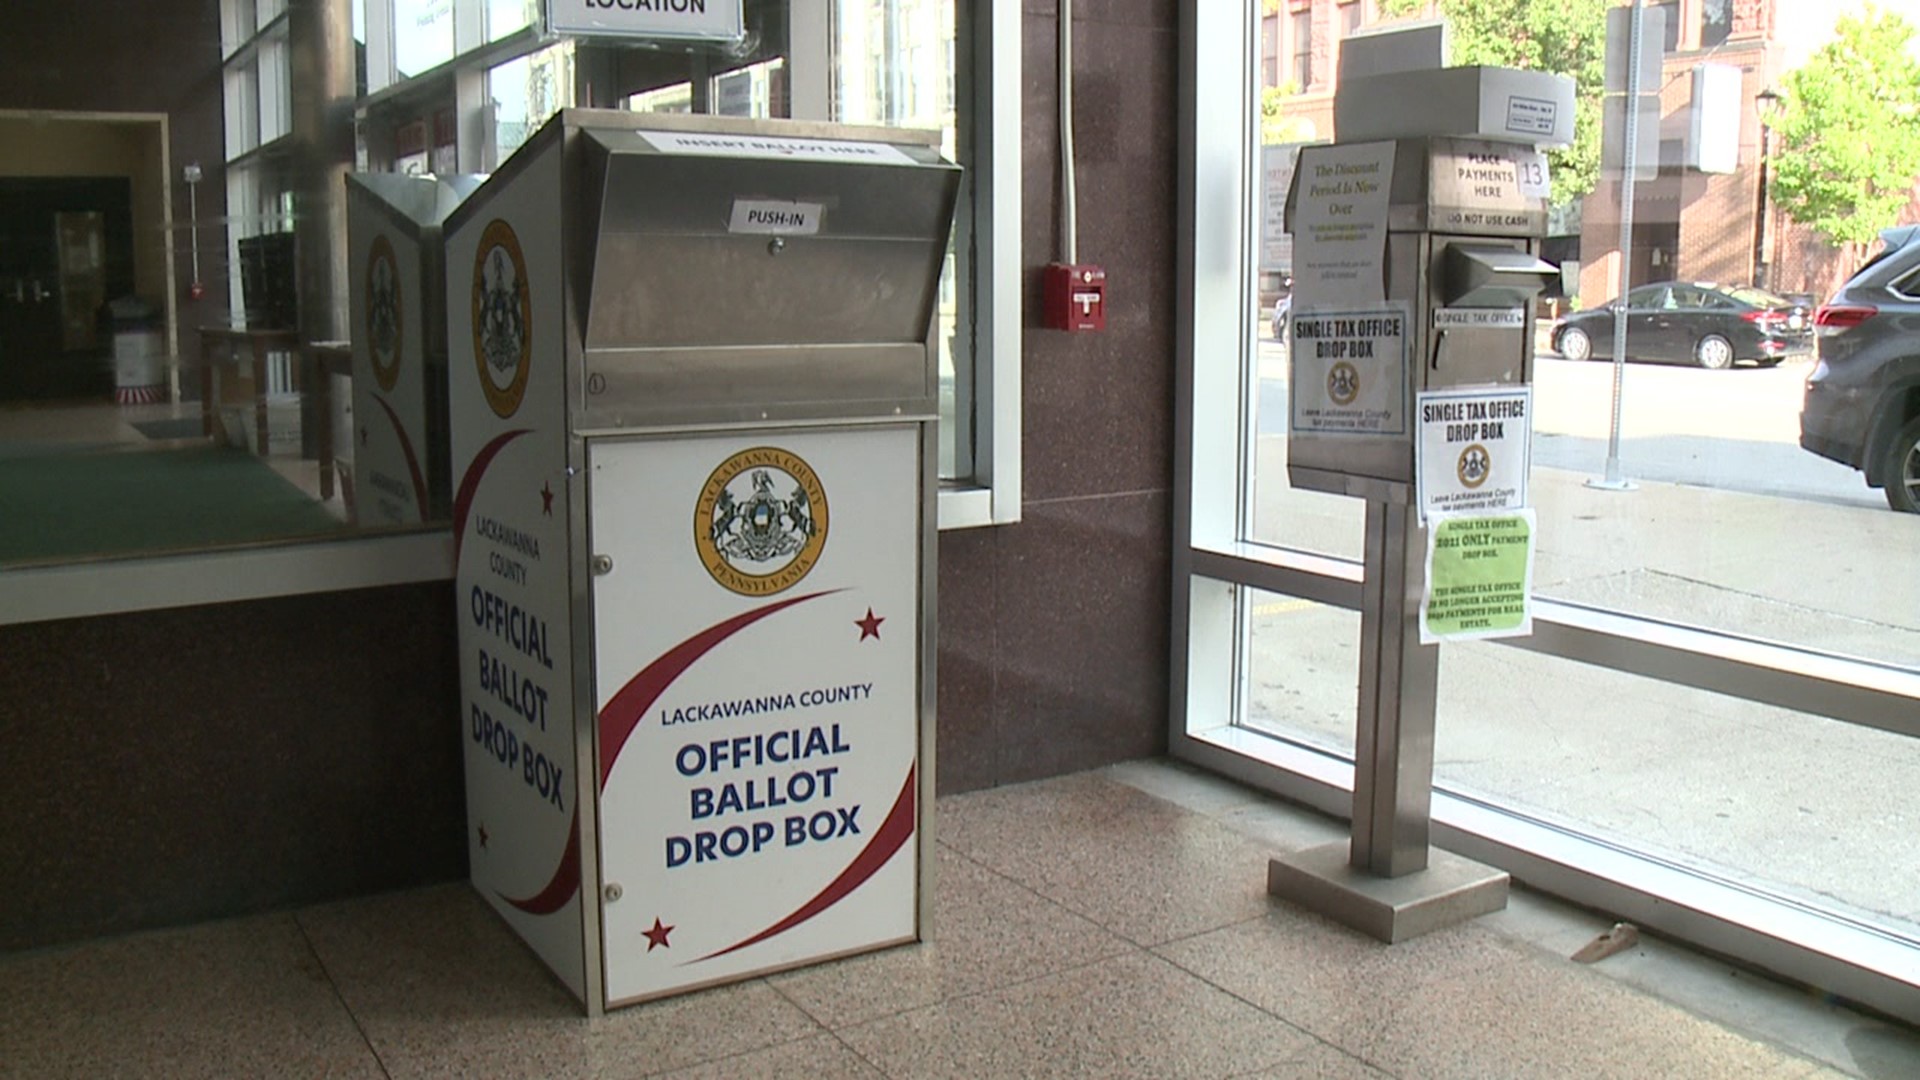 Voters can drop off their completed ballots anytime during normal business hours.